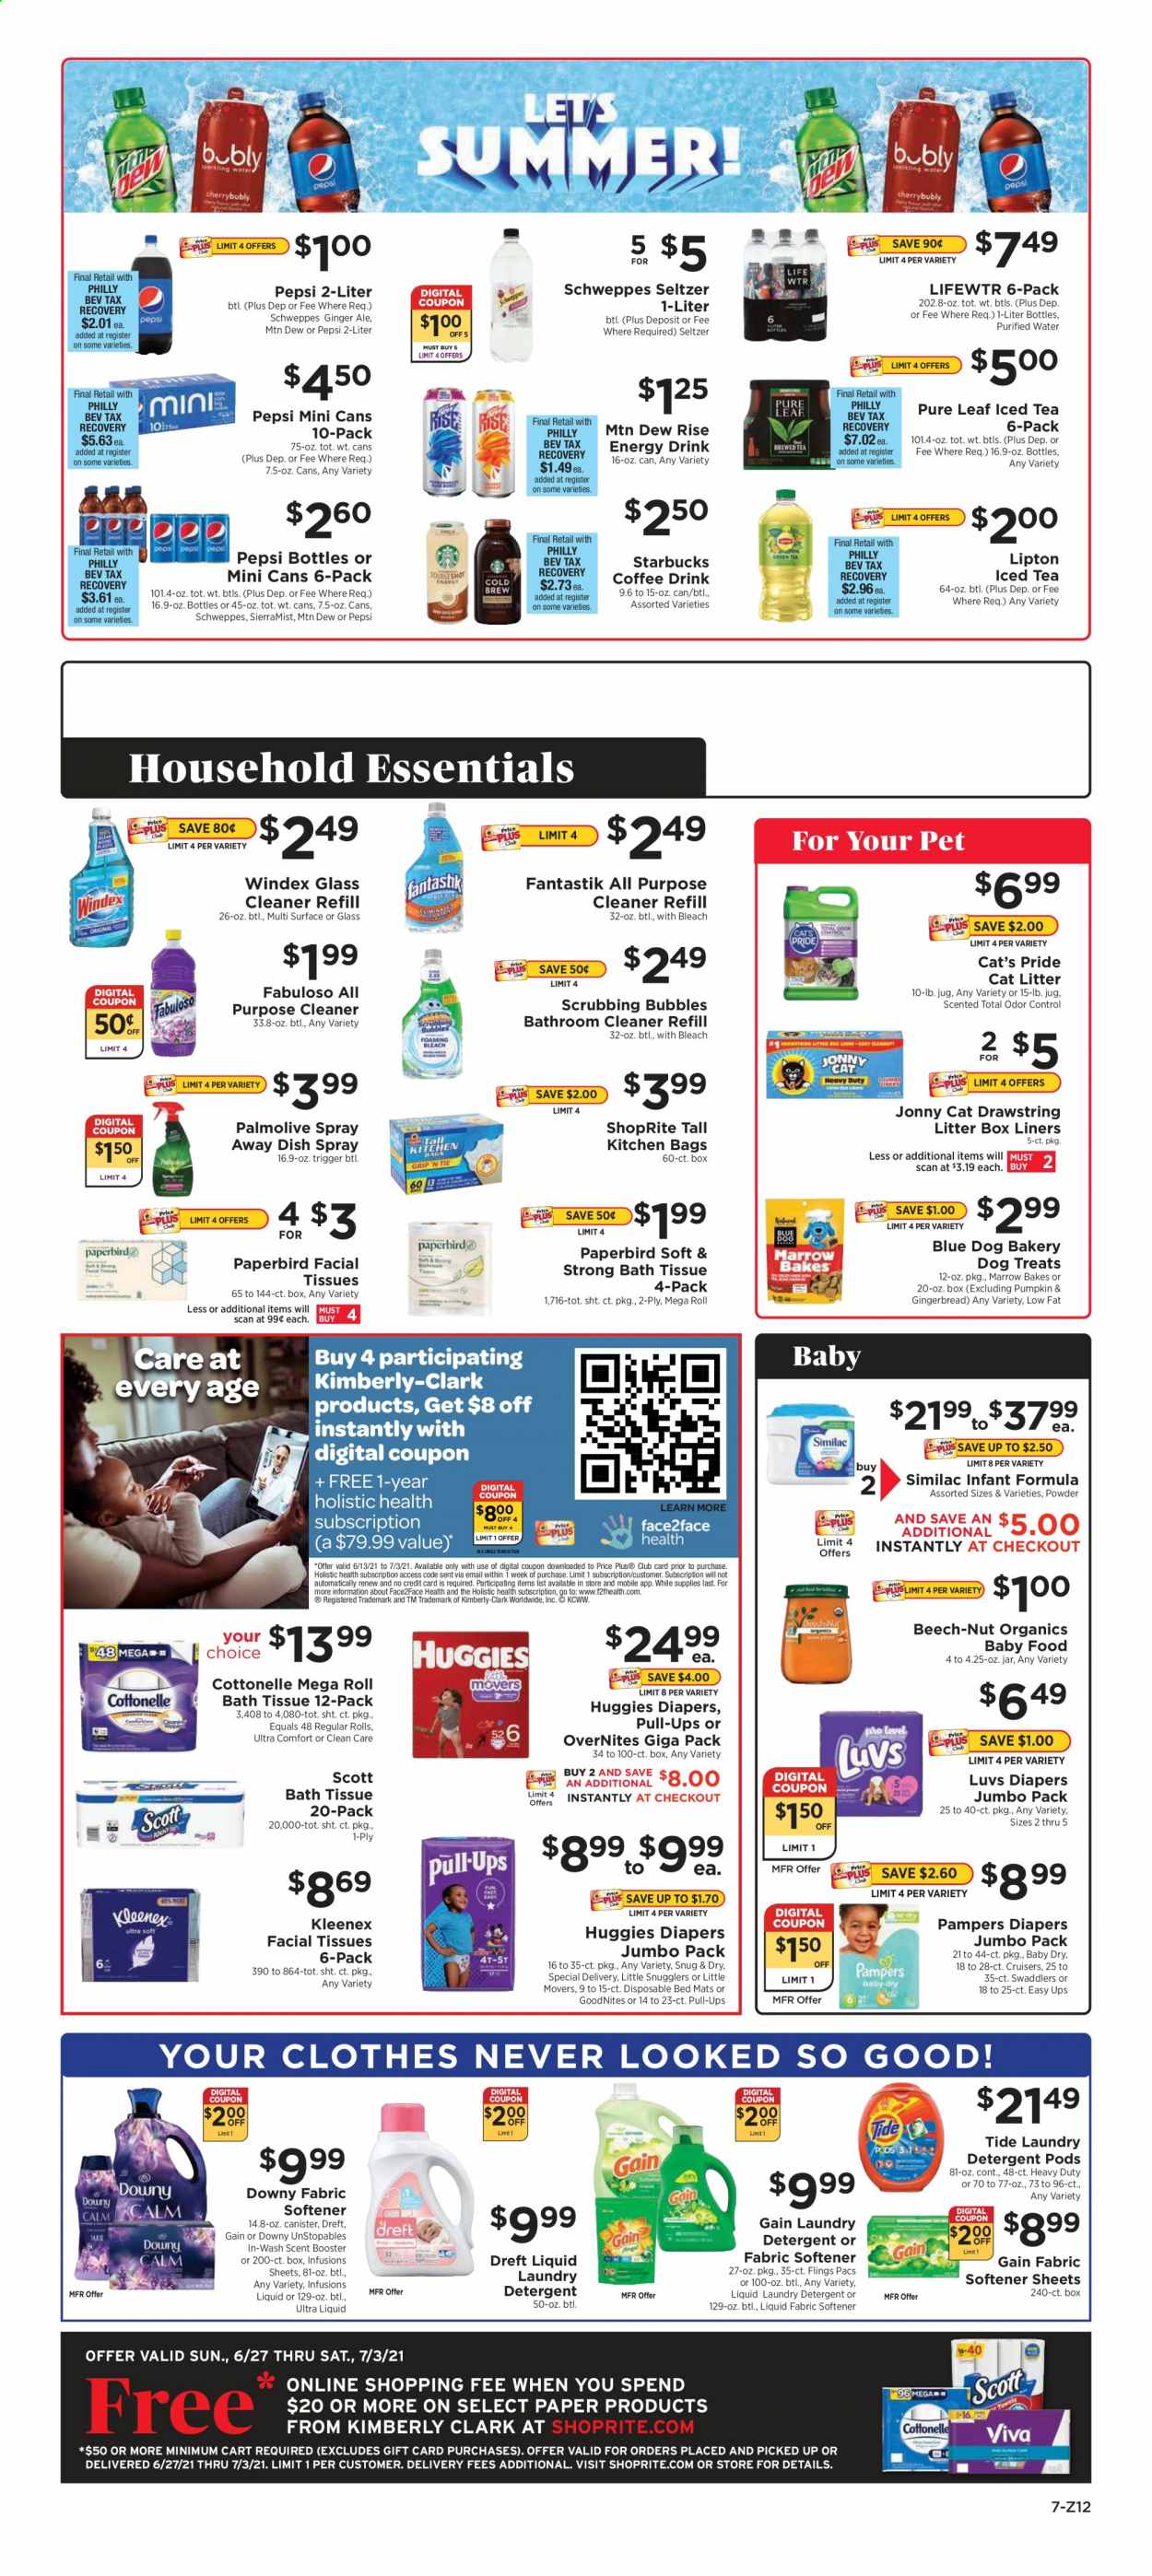 thumbnail - ShopRite Flyer - 06/27/2021 - 07/03/2021 - Sales products - ginger ale, Mountain Dew, Schweppes, Pepsi, energy drink, Lipton, ice tea, seltzer water, purified water, Lifewtr, Pure Leaf, Starbucks, Similac, Huggies, Pampers, nappies, bath tissue, Cottonelle, Kleenex, Scott, detergent, Gain, Windex, Scrubbing Bubbles, cleaner, bleach, all purpose cleaner, glass cleaner, Fabuloso, Tide, Unstopables, fabric softener, laundry detergent, Downy Laundry, Palmolive, facial tissues, paper, cat litter. Page 7.